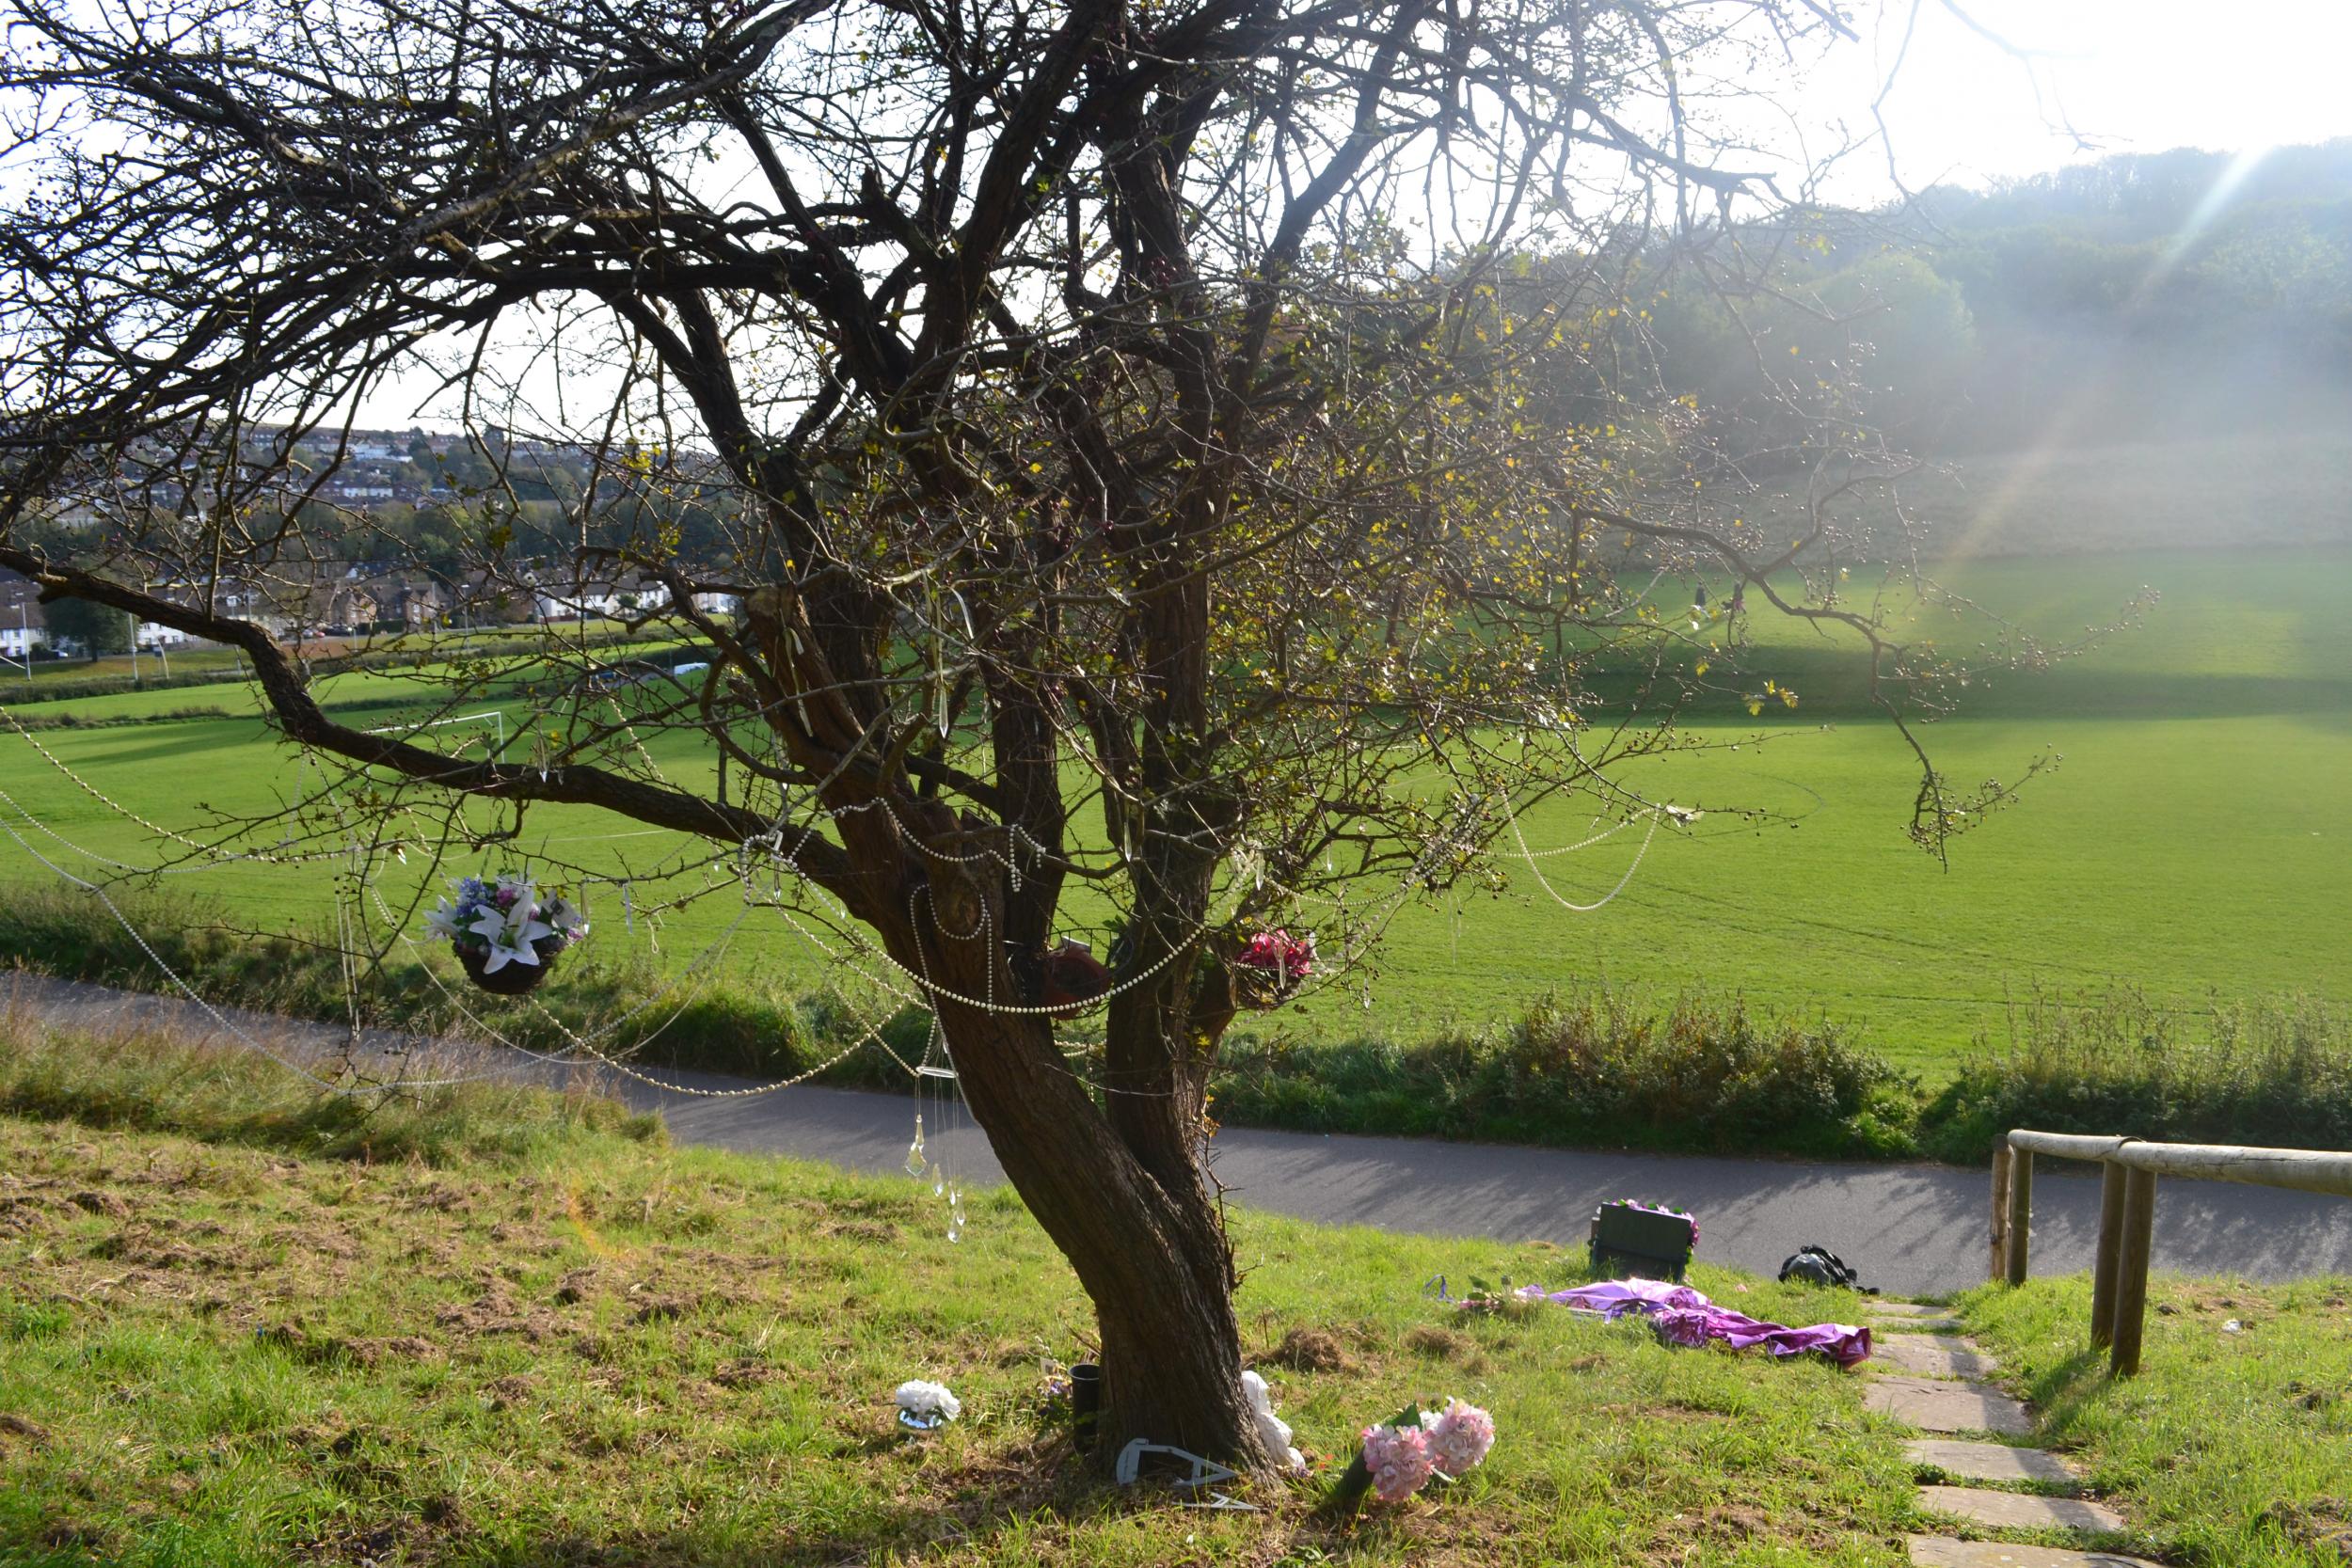 The tree where the two girls played shortly before they were murdered has become a memorial